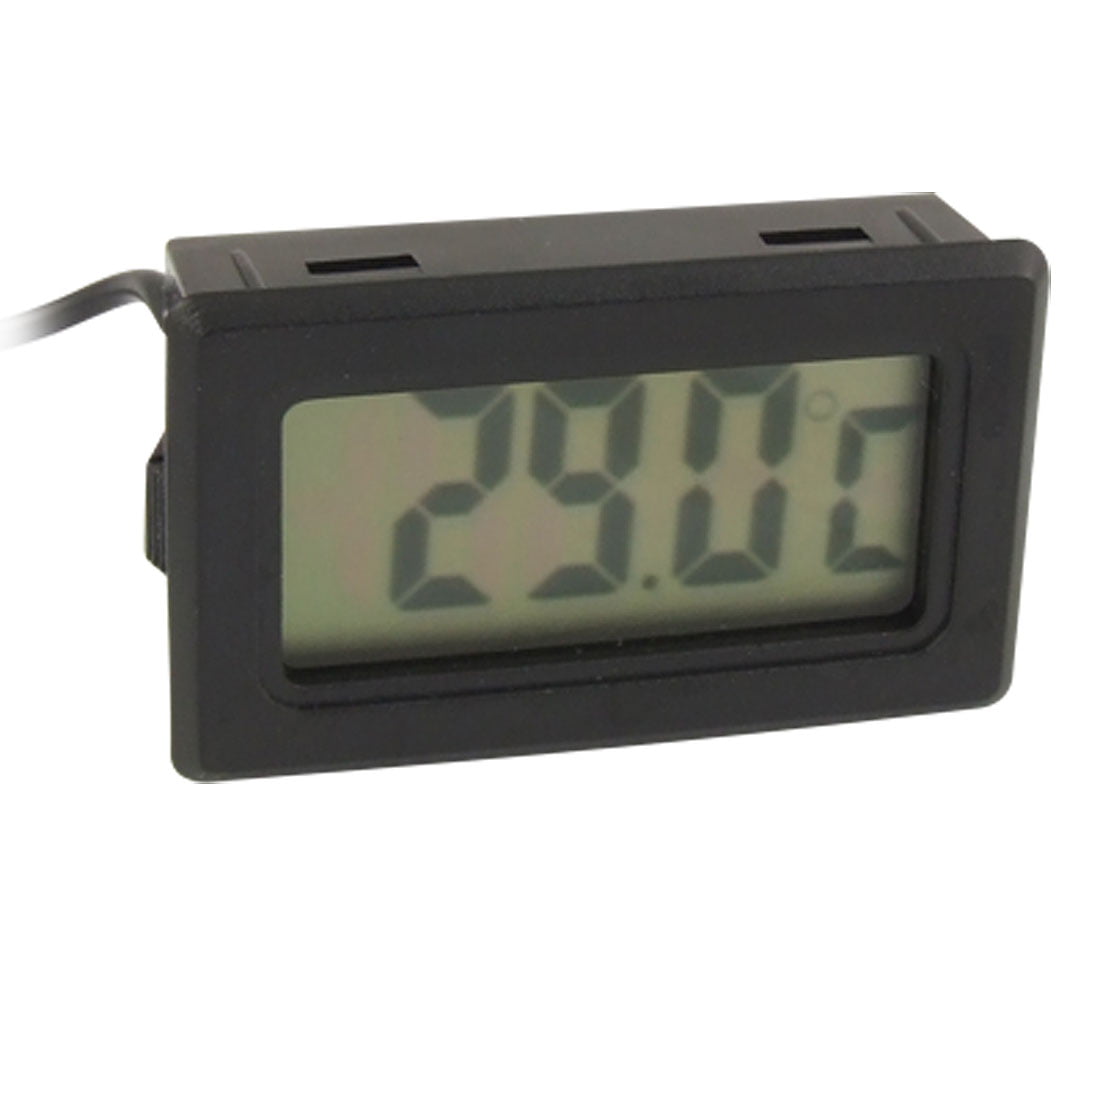 Chiller Black LED LCD Display Digital Thermometer New